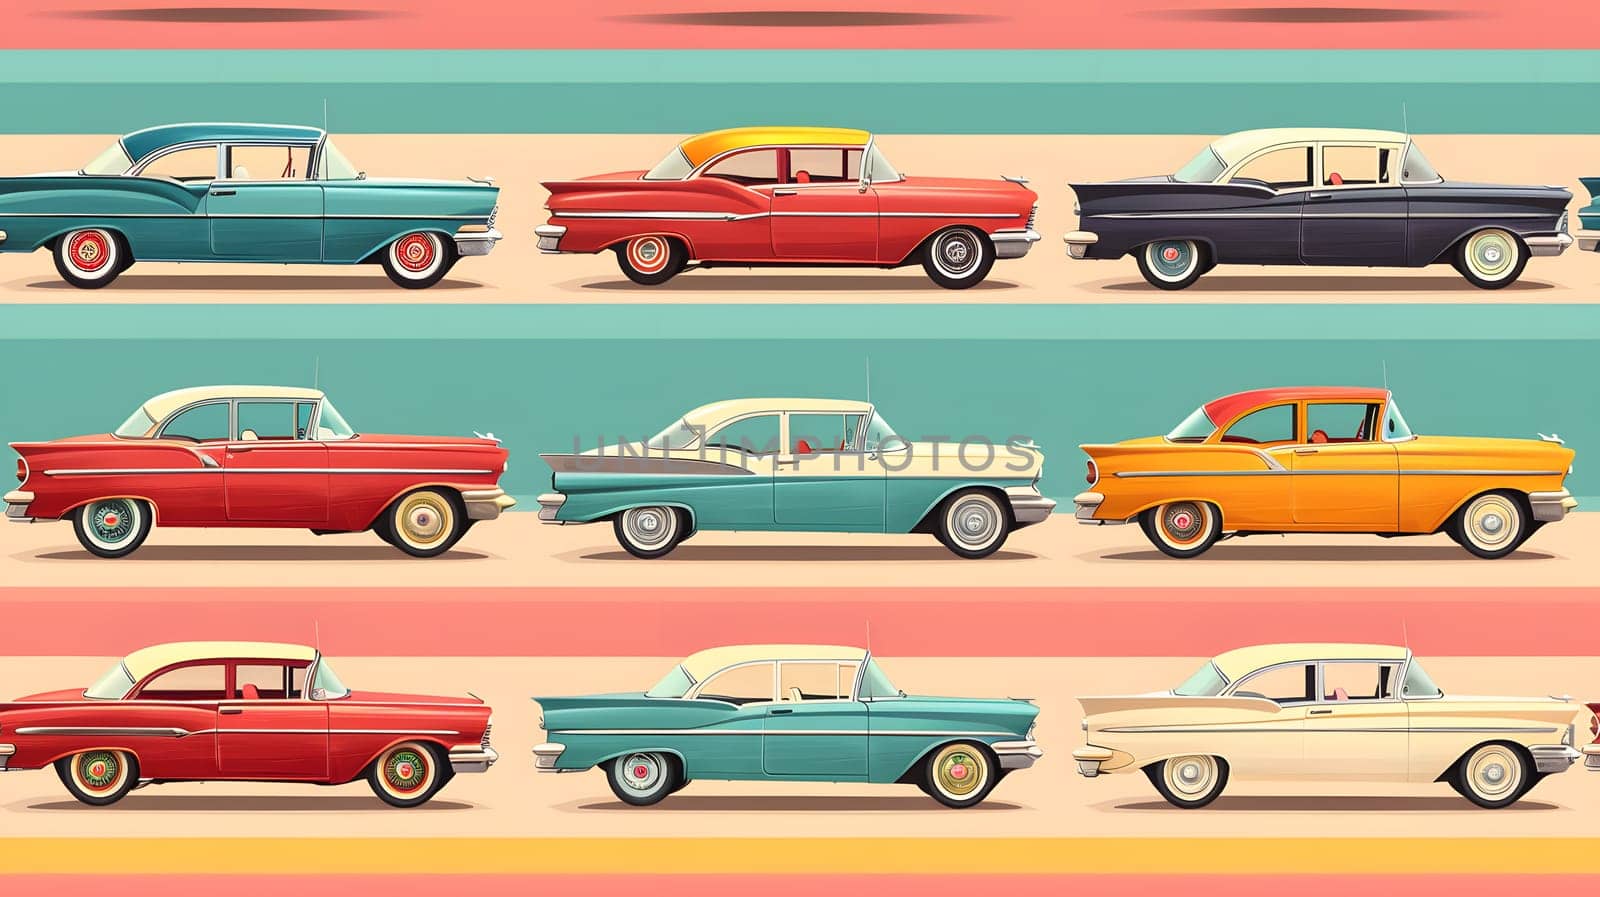 Vintage cars in a row, classic yellow vehicles with shiny tires by Nadtochiy